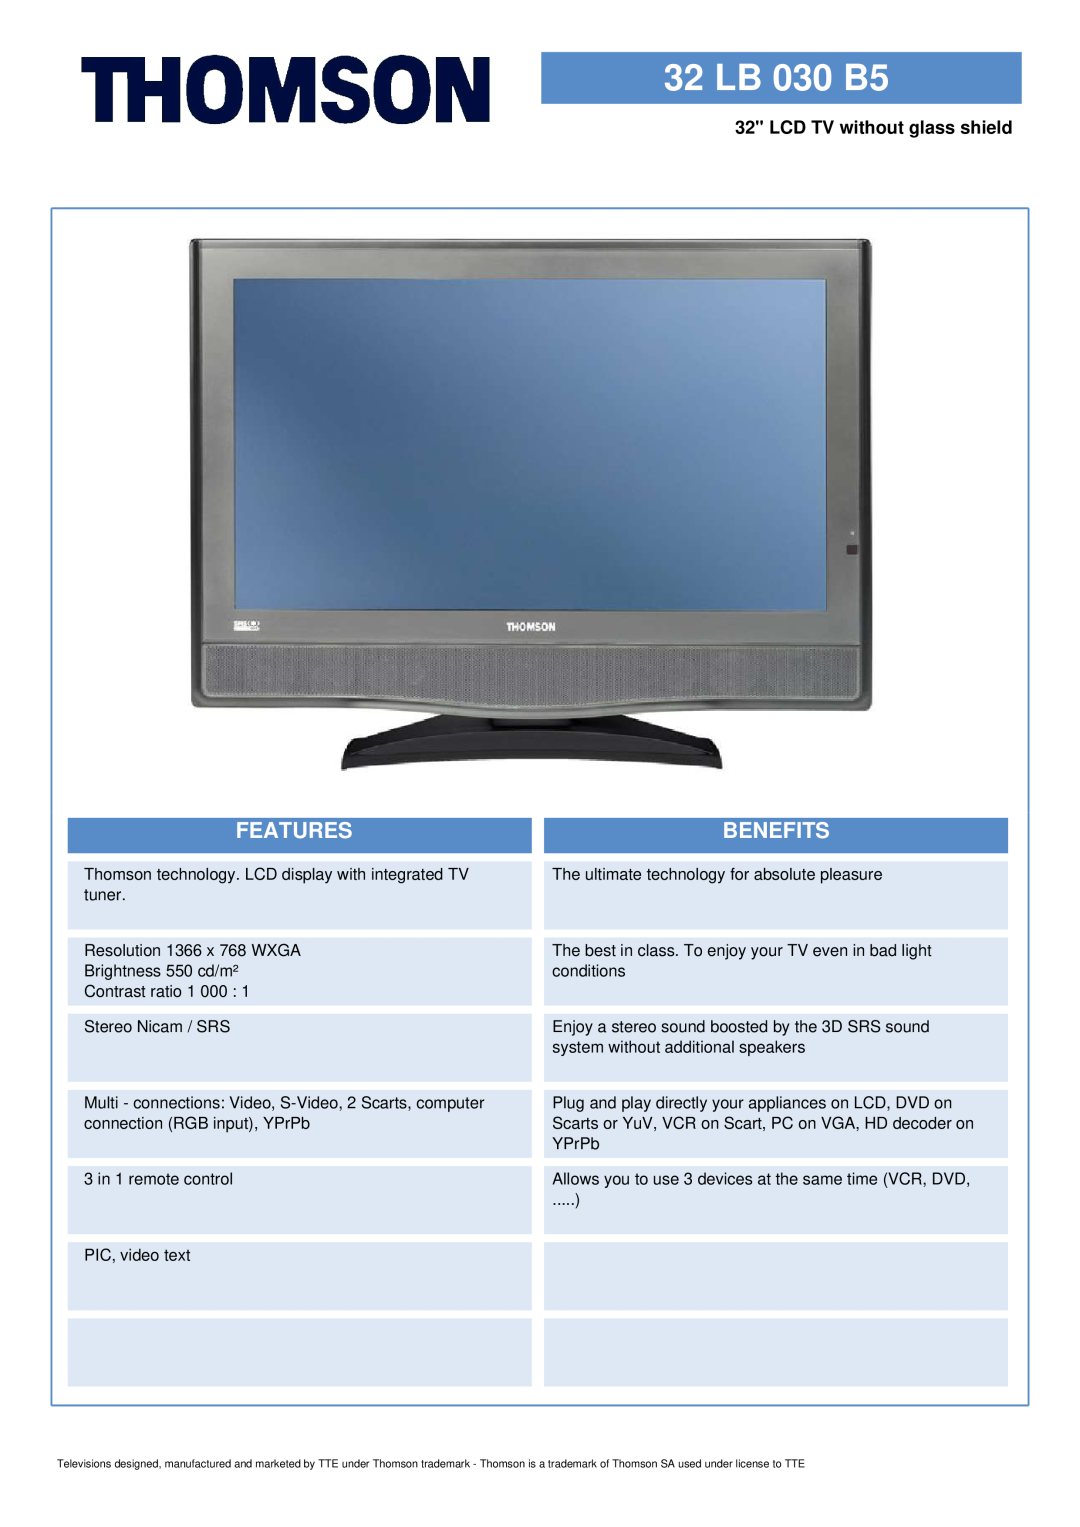 Technicolor - Thomson 32LB030B5 manual 32 LB 030 B5, LCD TV without glass shield, Features, Benefits 